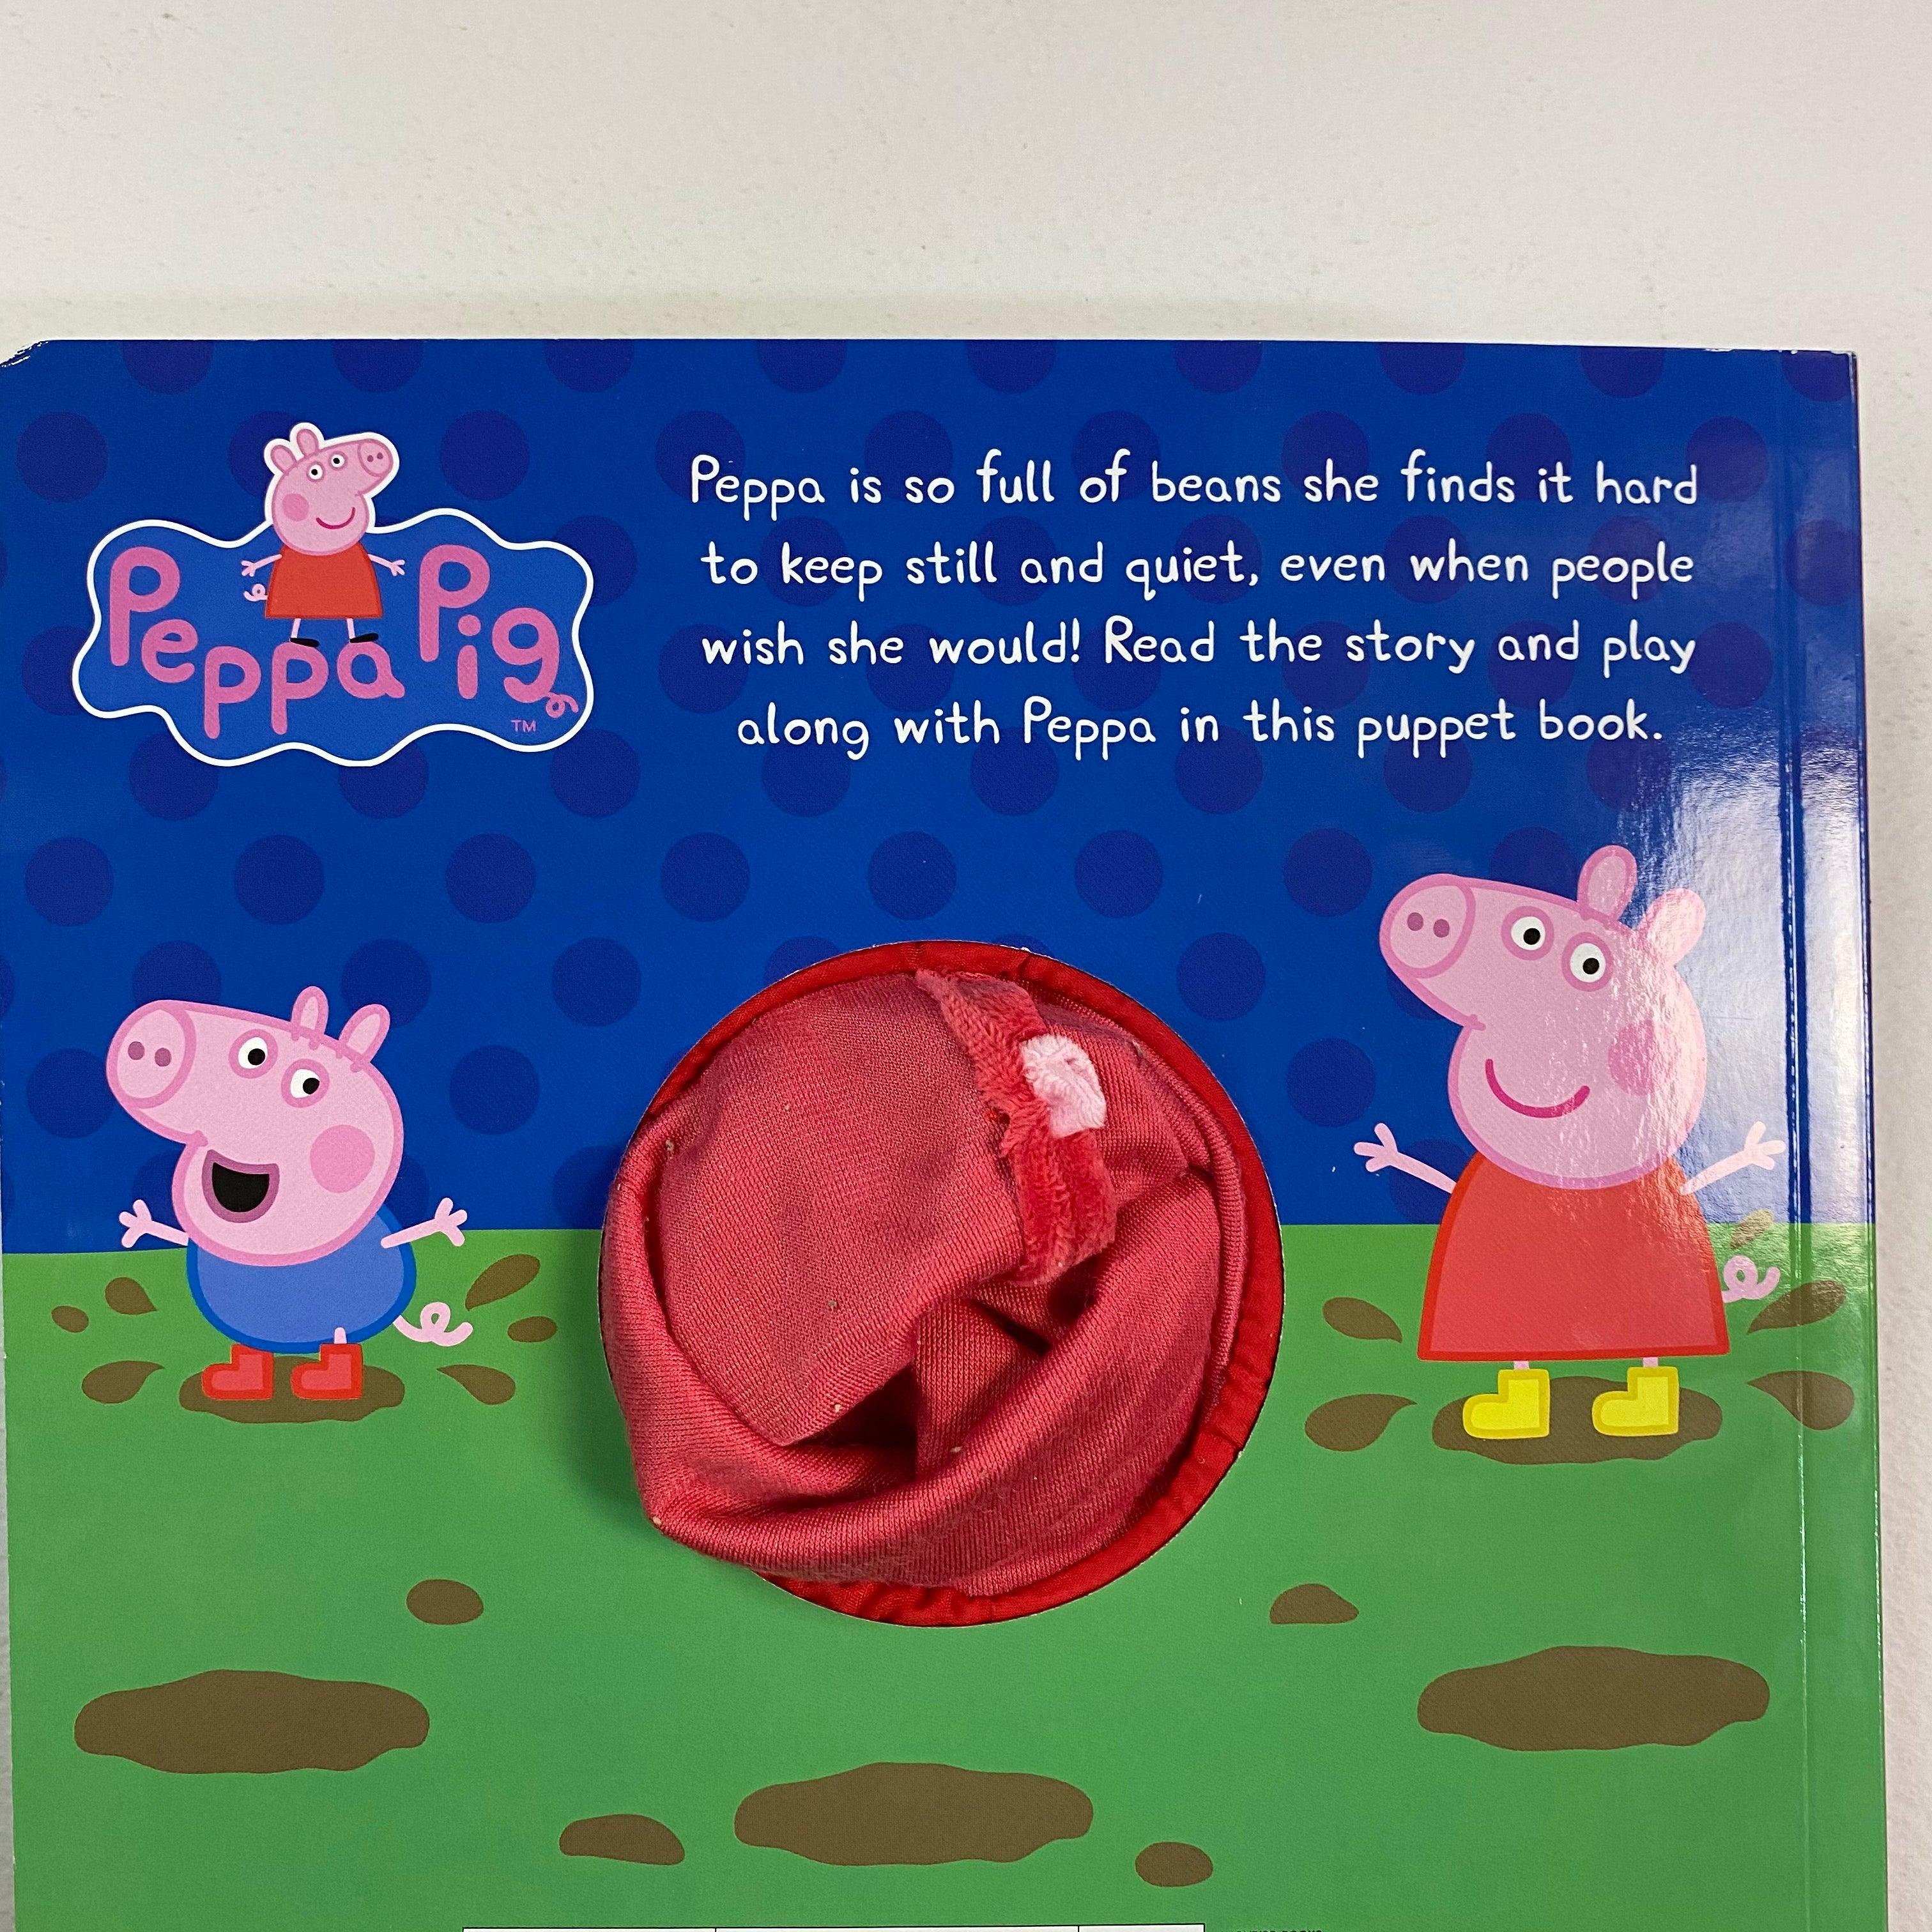 Peppa Pig - Play With Peppa! A Puppet Play Book